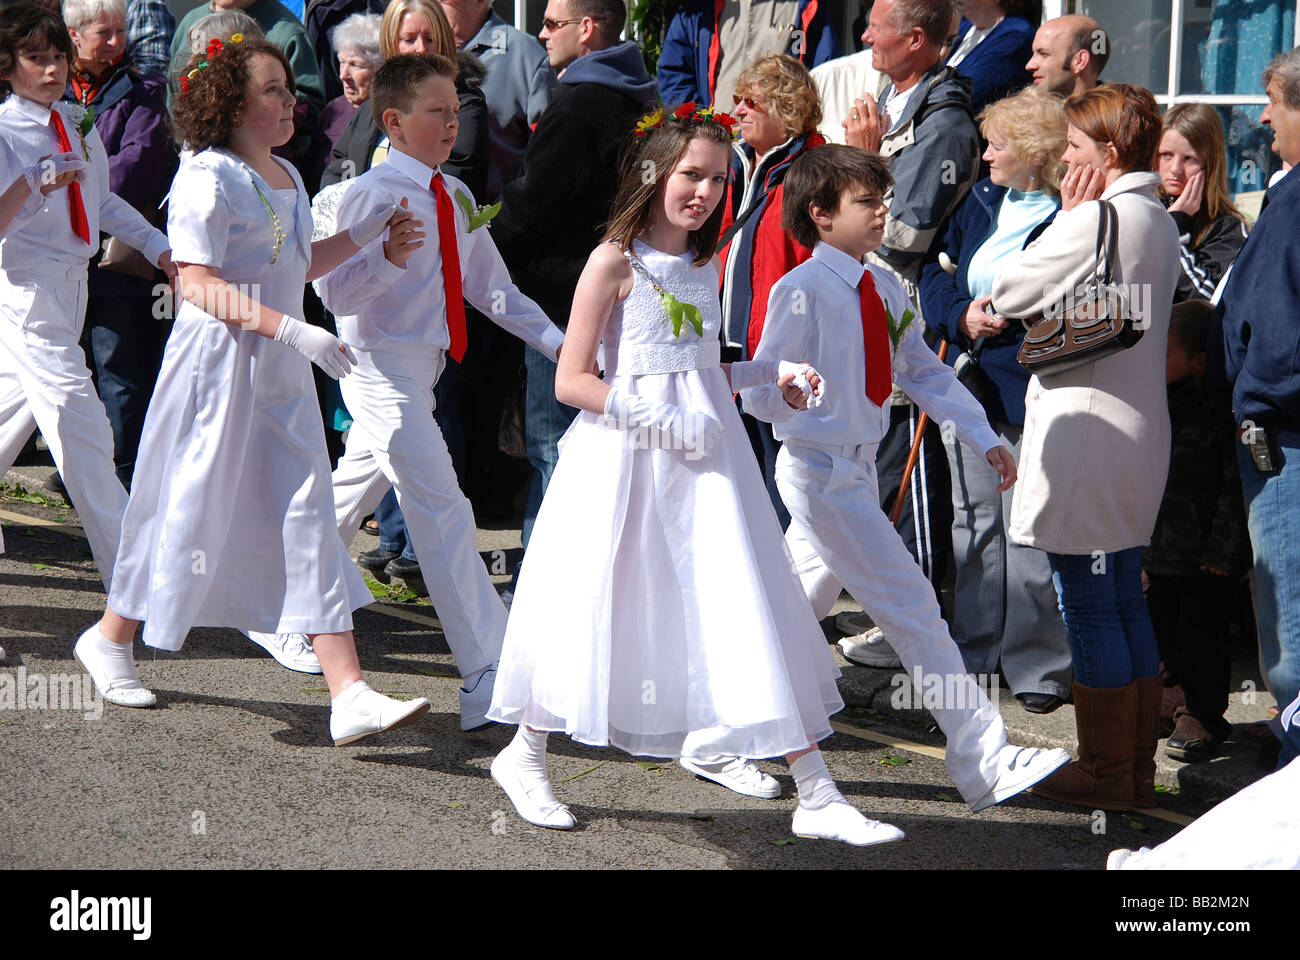 children taking part in the dancing during the helston flora day celebrations,cornwall,uk Stock Photo